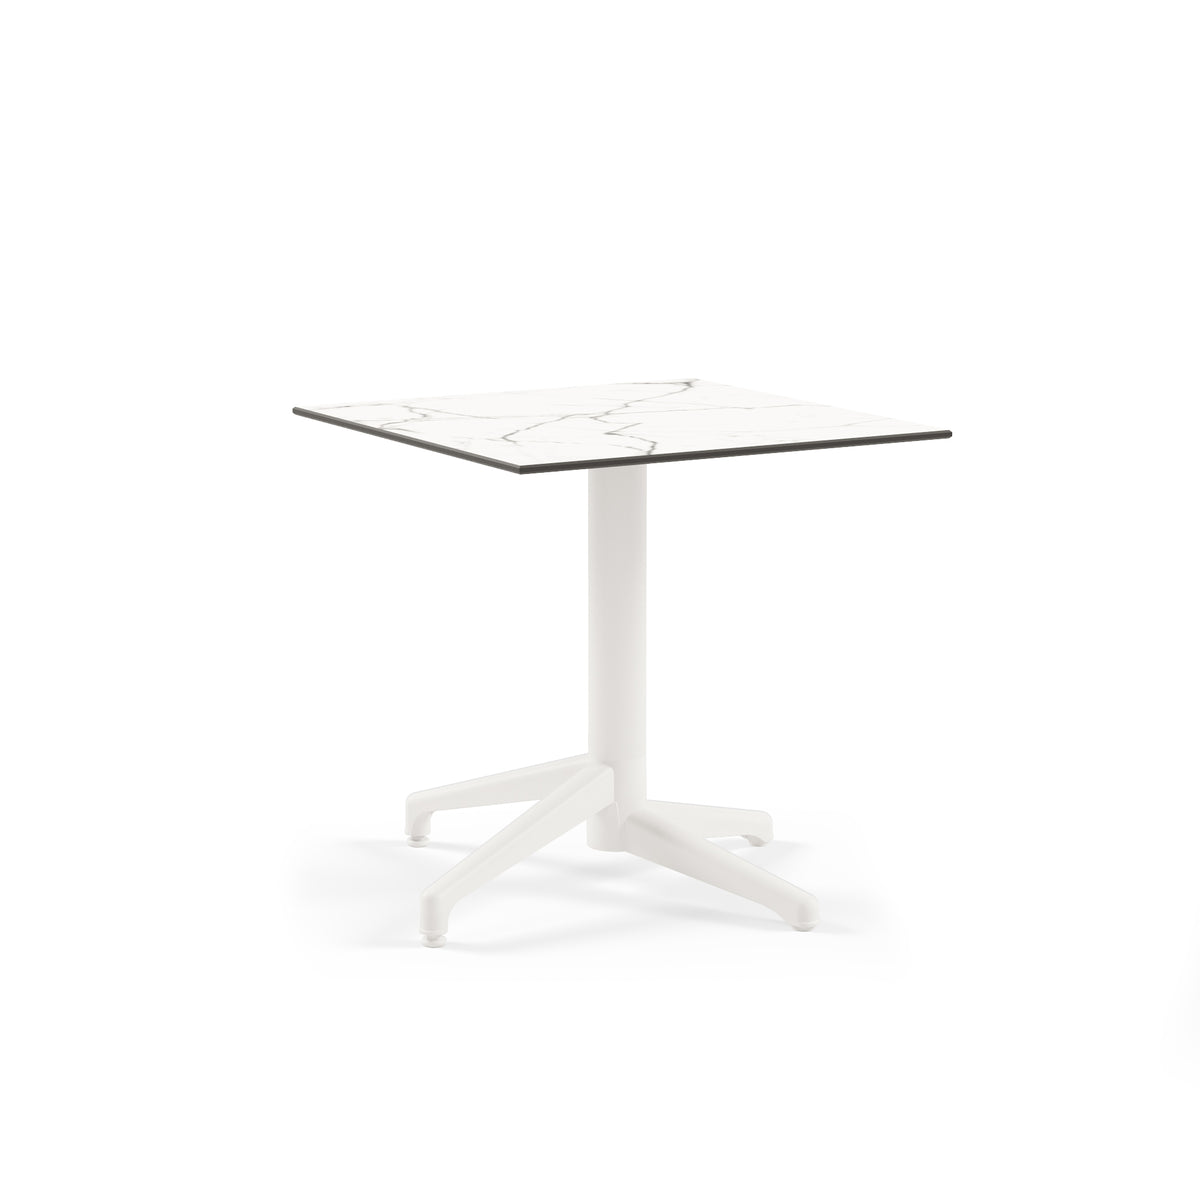 MOON C SQUARE TABLE 77X77CM WHITE MARBLE